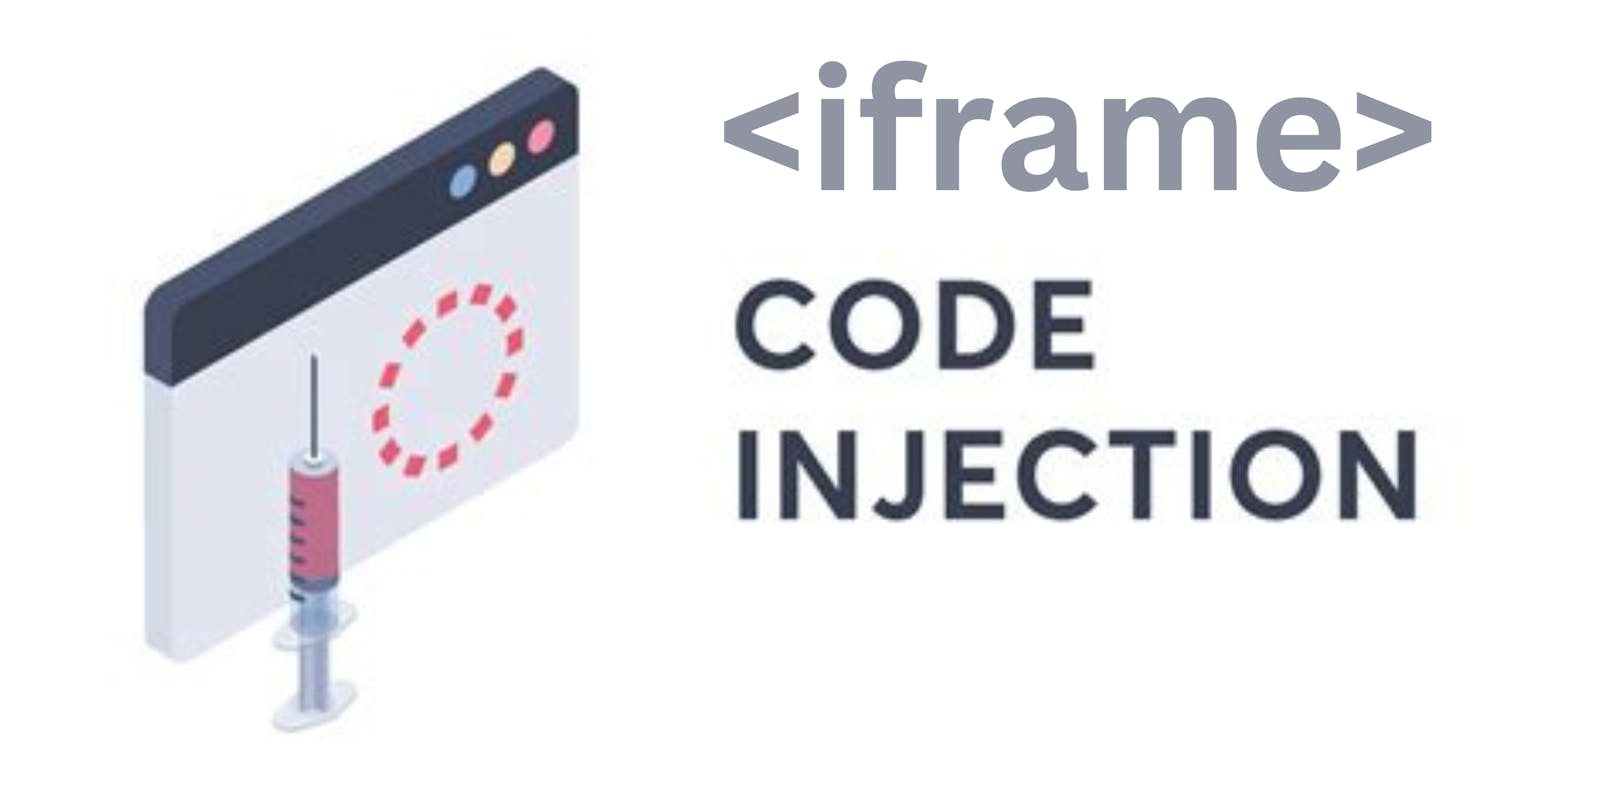 How to inject code into an iframe